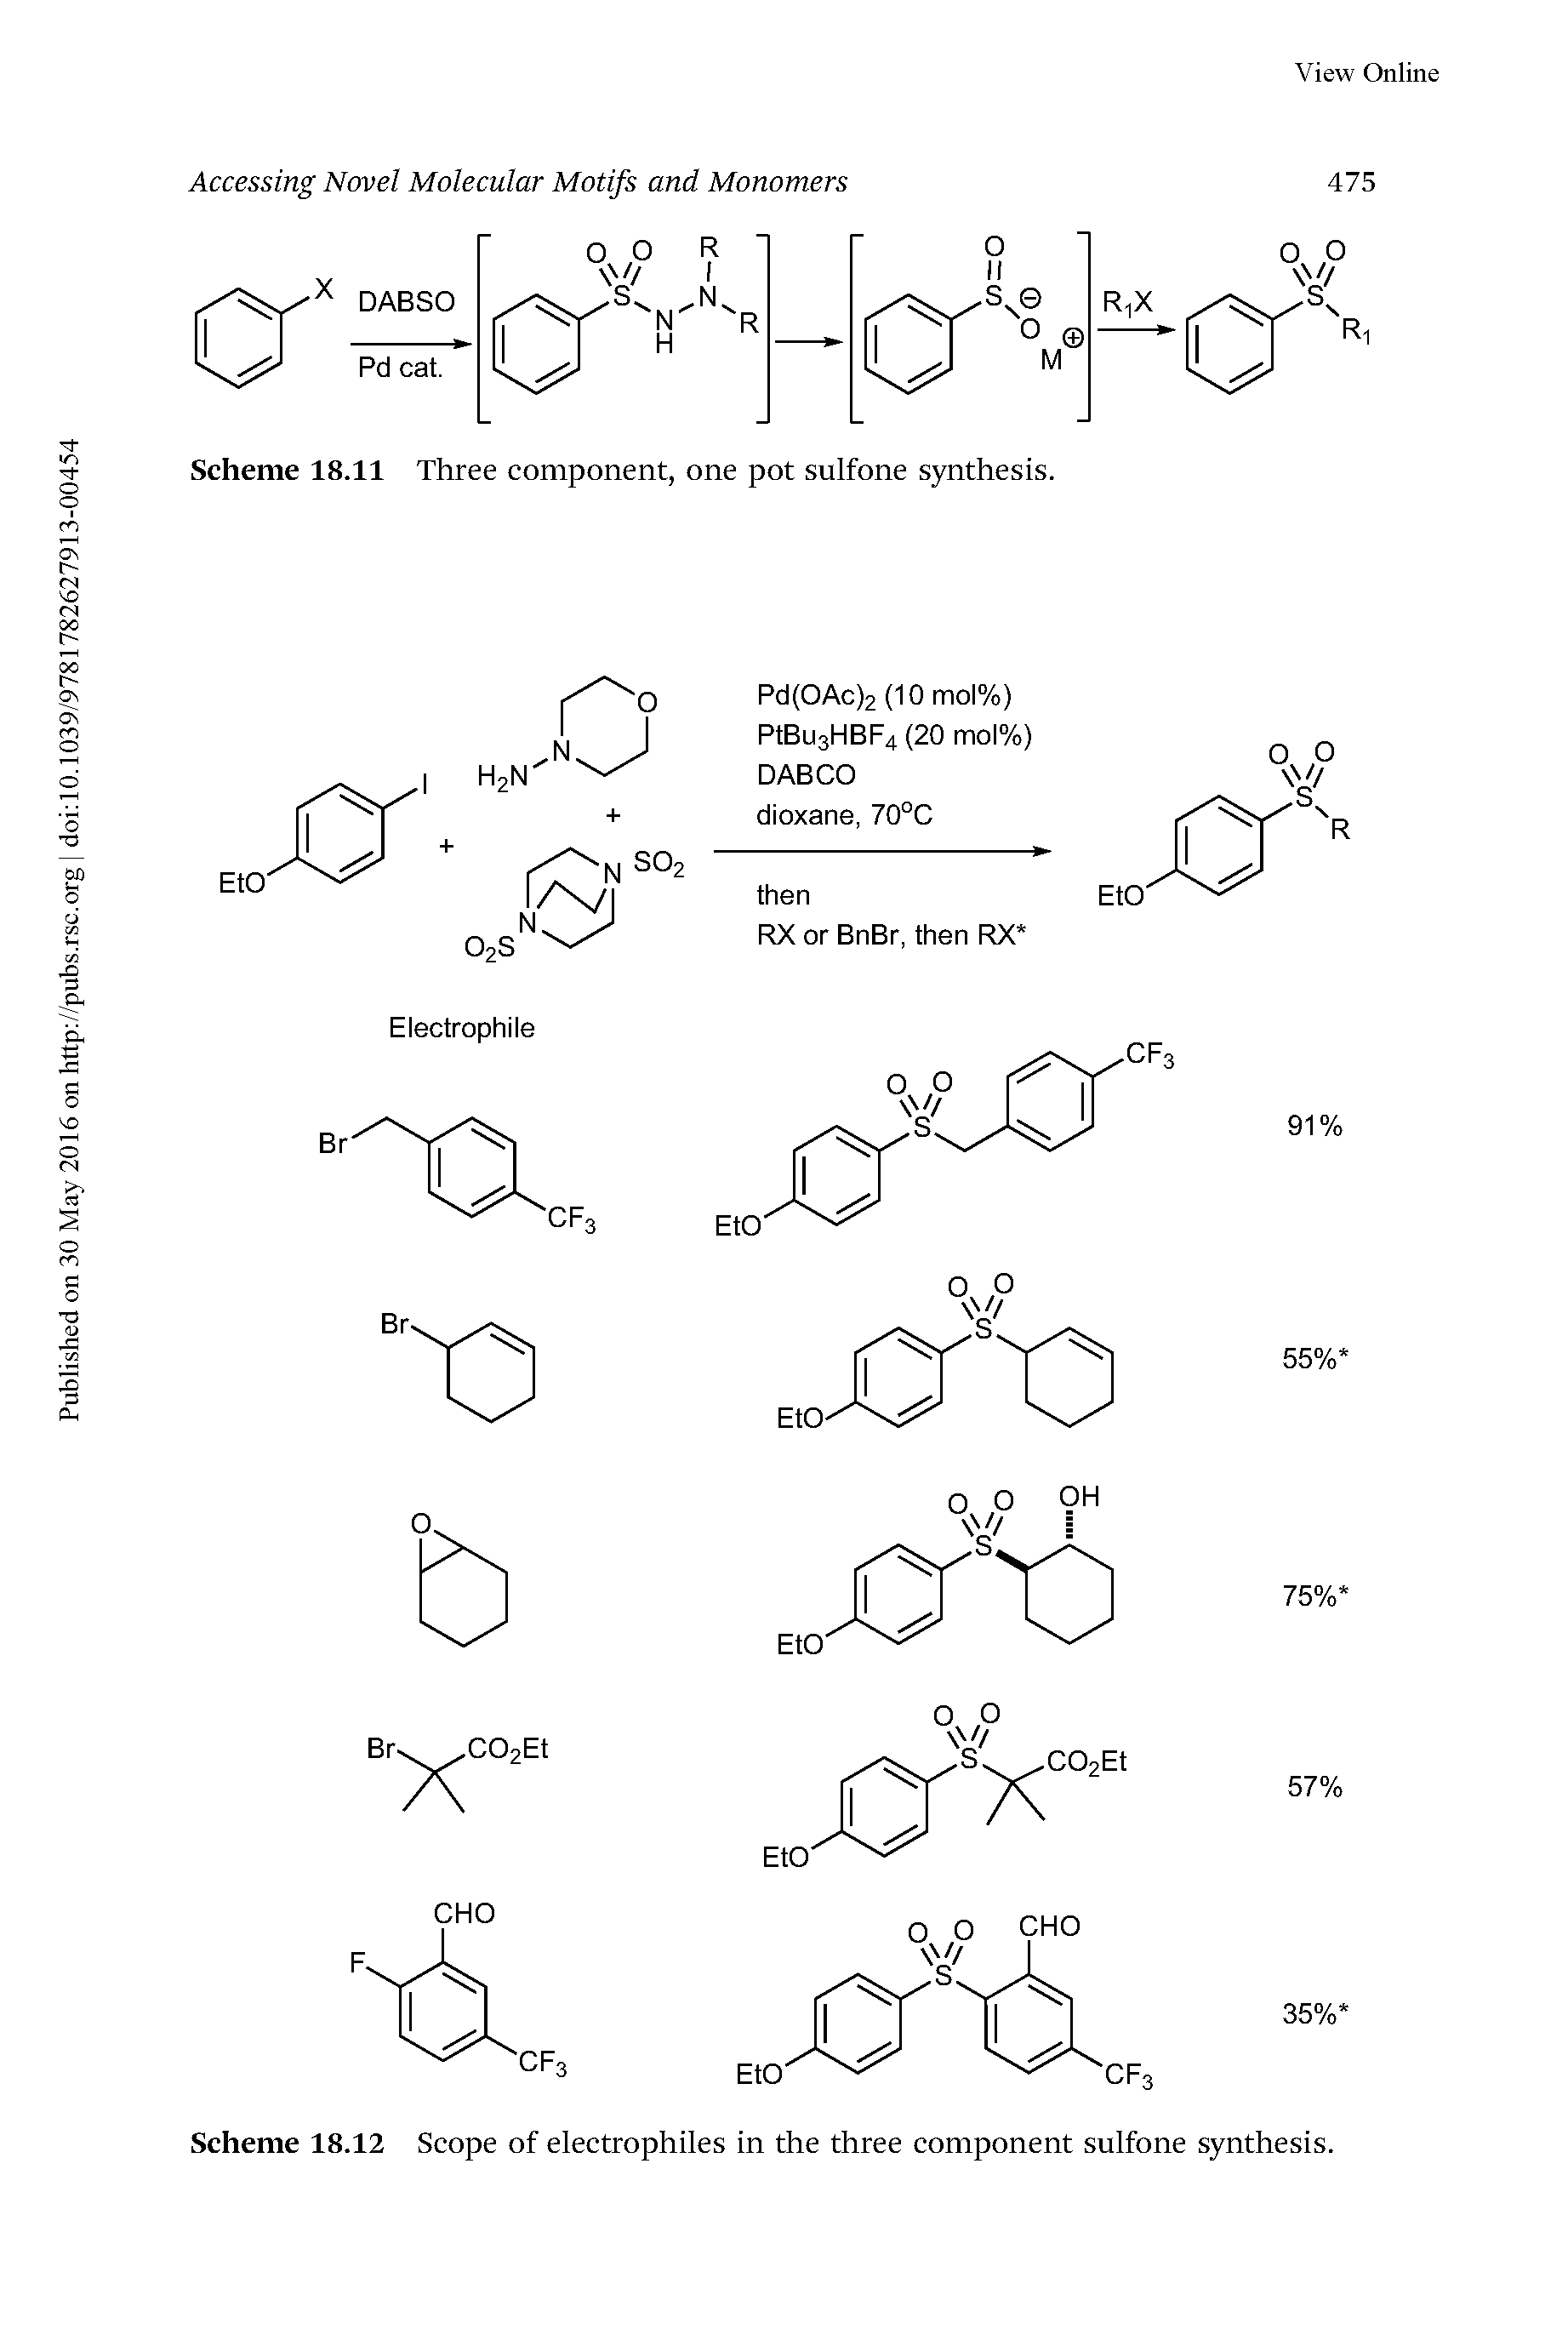 Scheme 18.12 Scope of electrophiles in the three component sulfone synthesis.